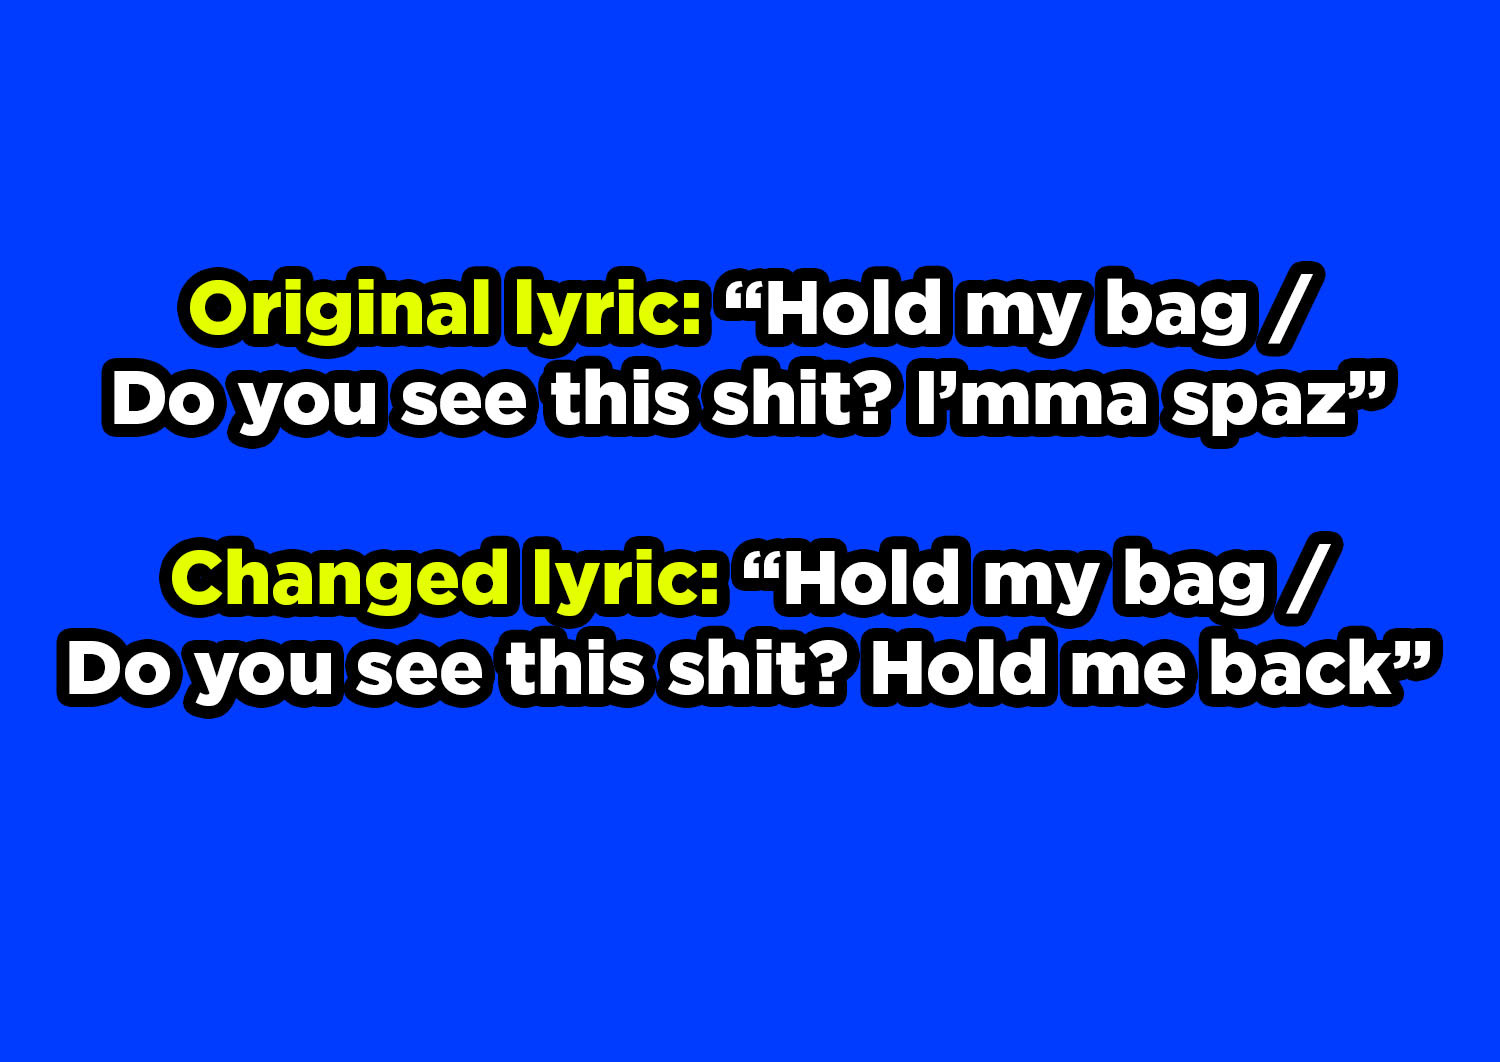 Original lyric: Hold my bag, do you see this shit? I&#x27;mma spaz; changed lyric: Hold my bag, do you see this shit? Hold me back